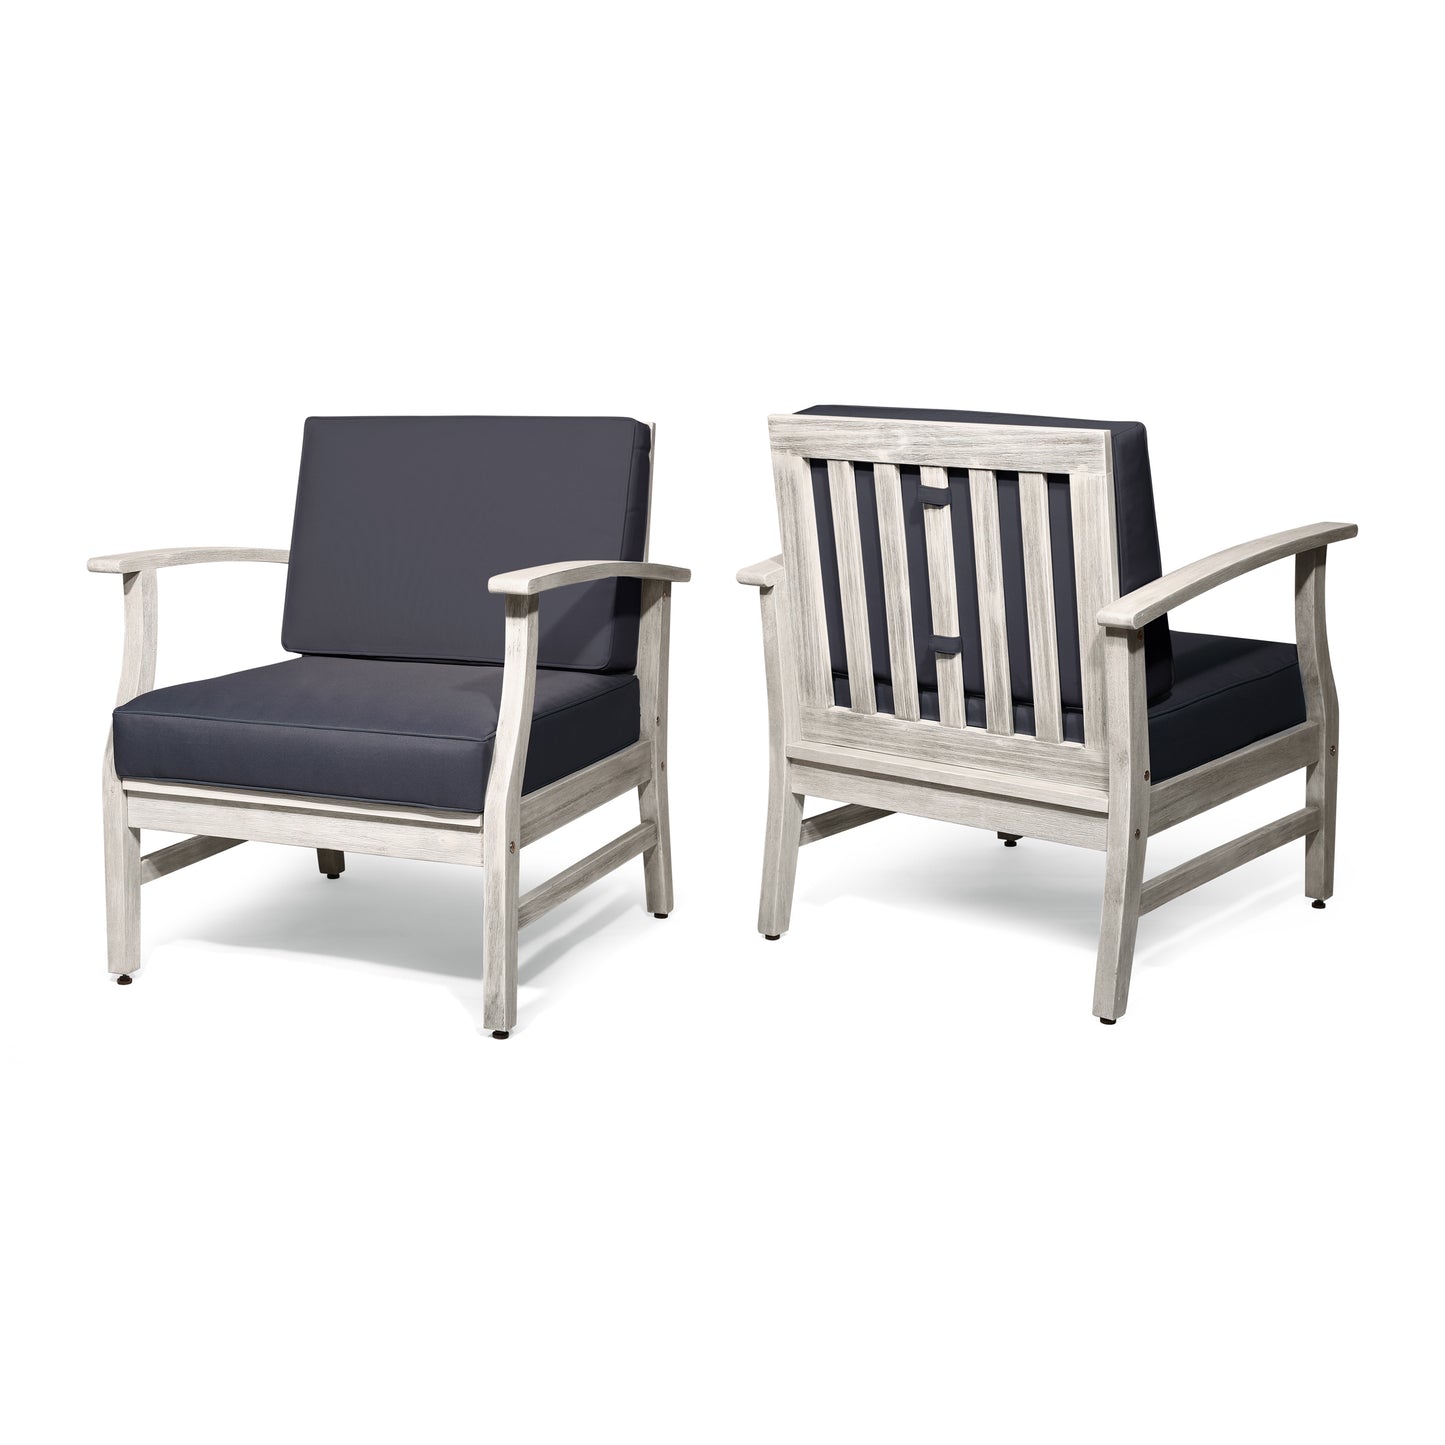 Fanny Outdoor Acacia Wood Club Chairs with Cushions (Set of 2), Light Gray and Dark Gray